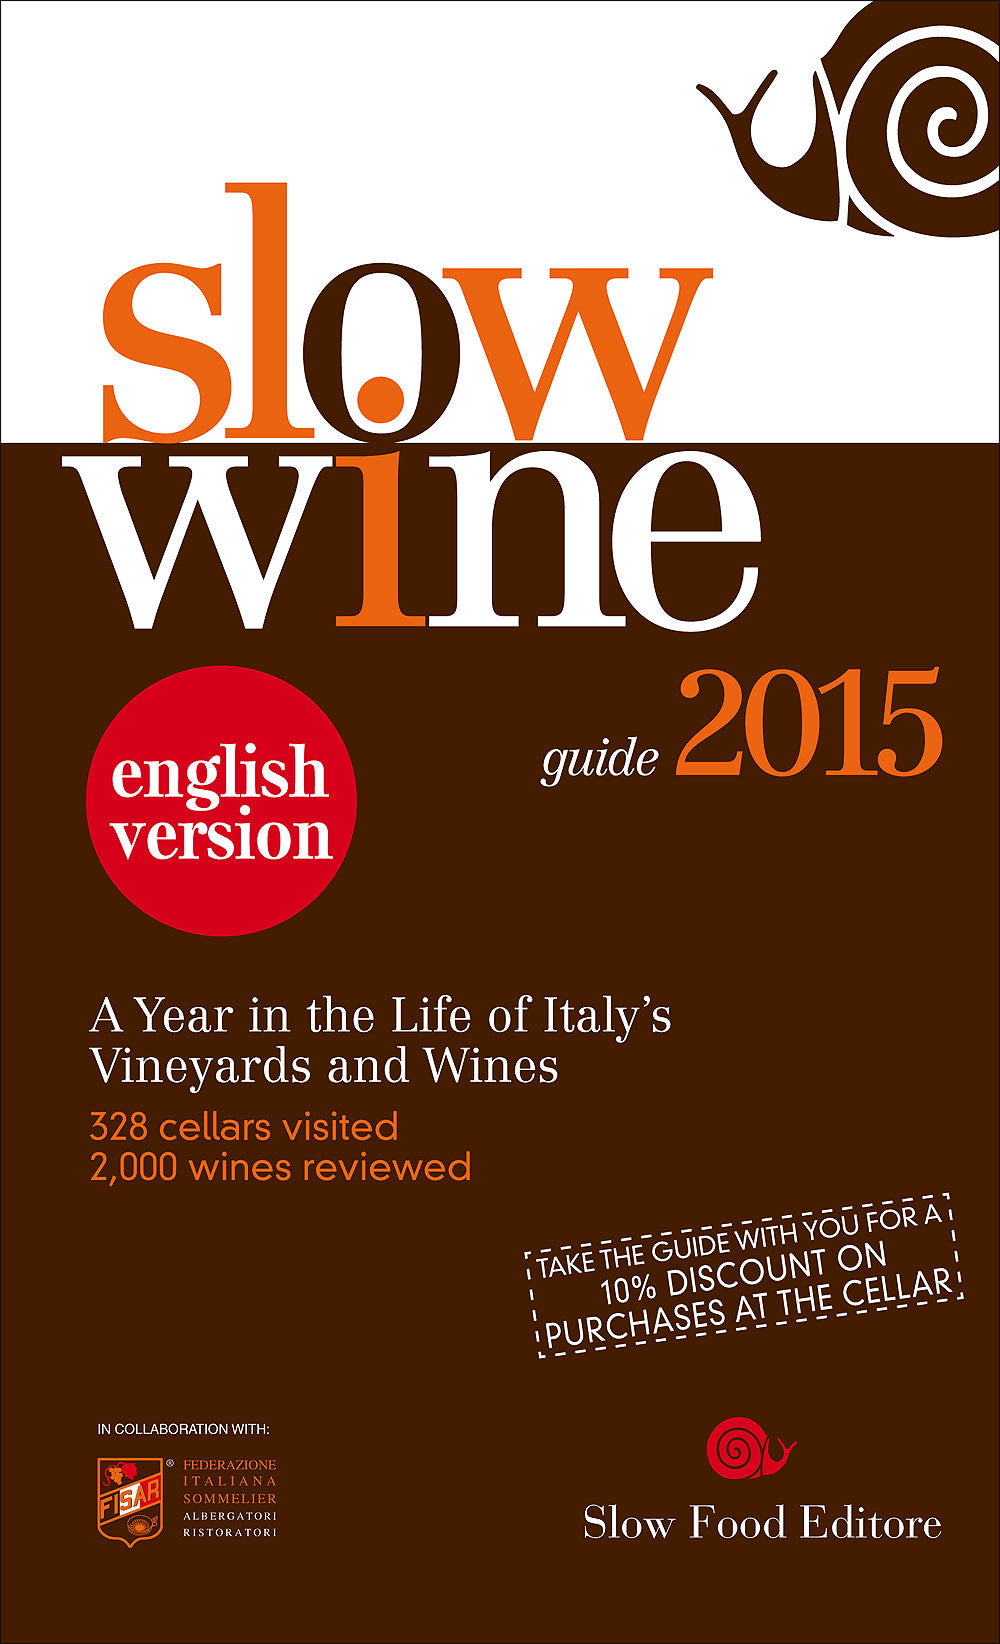 Slow Wine - guide 2015. A Year in the Life of Italy's Vineyards and Wines